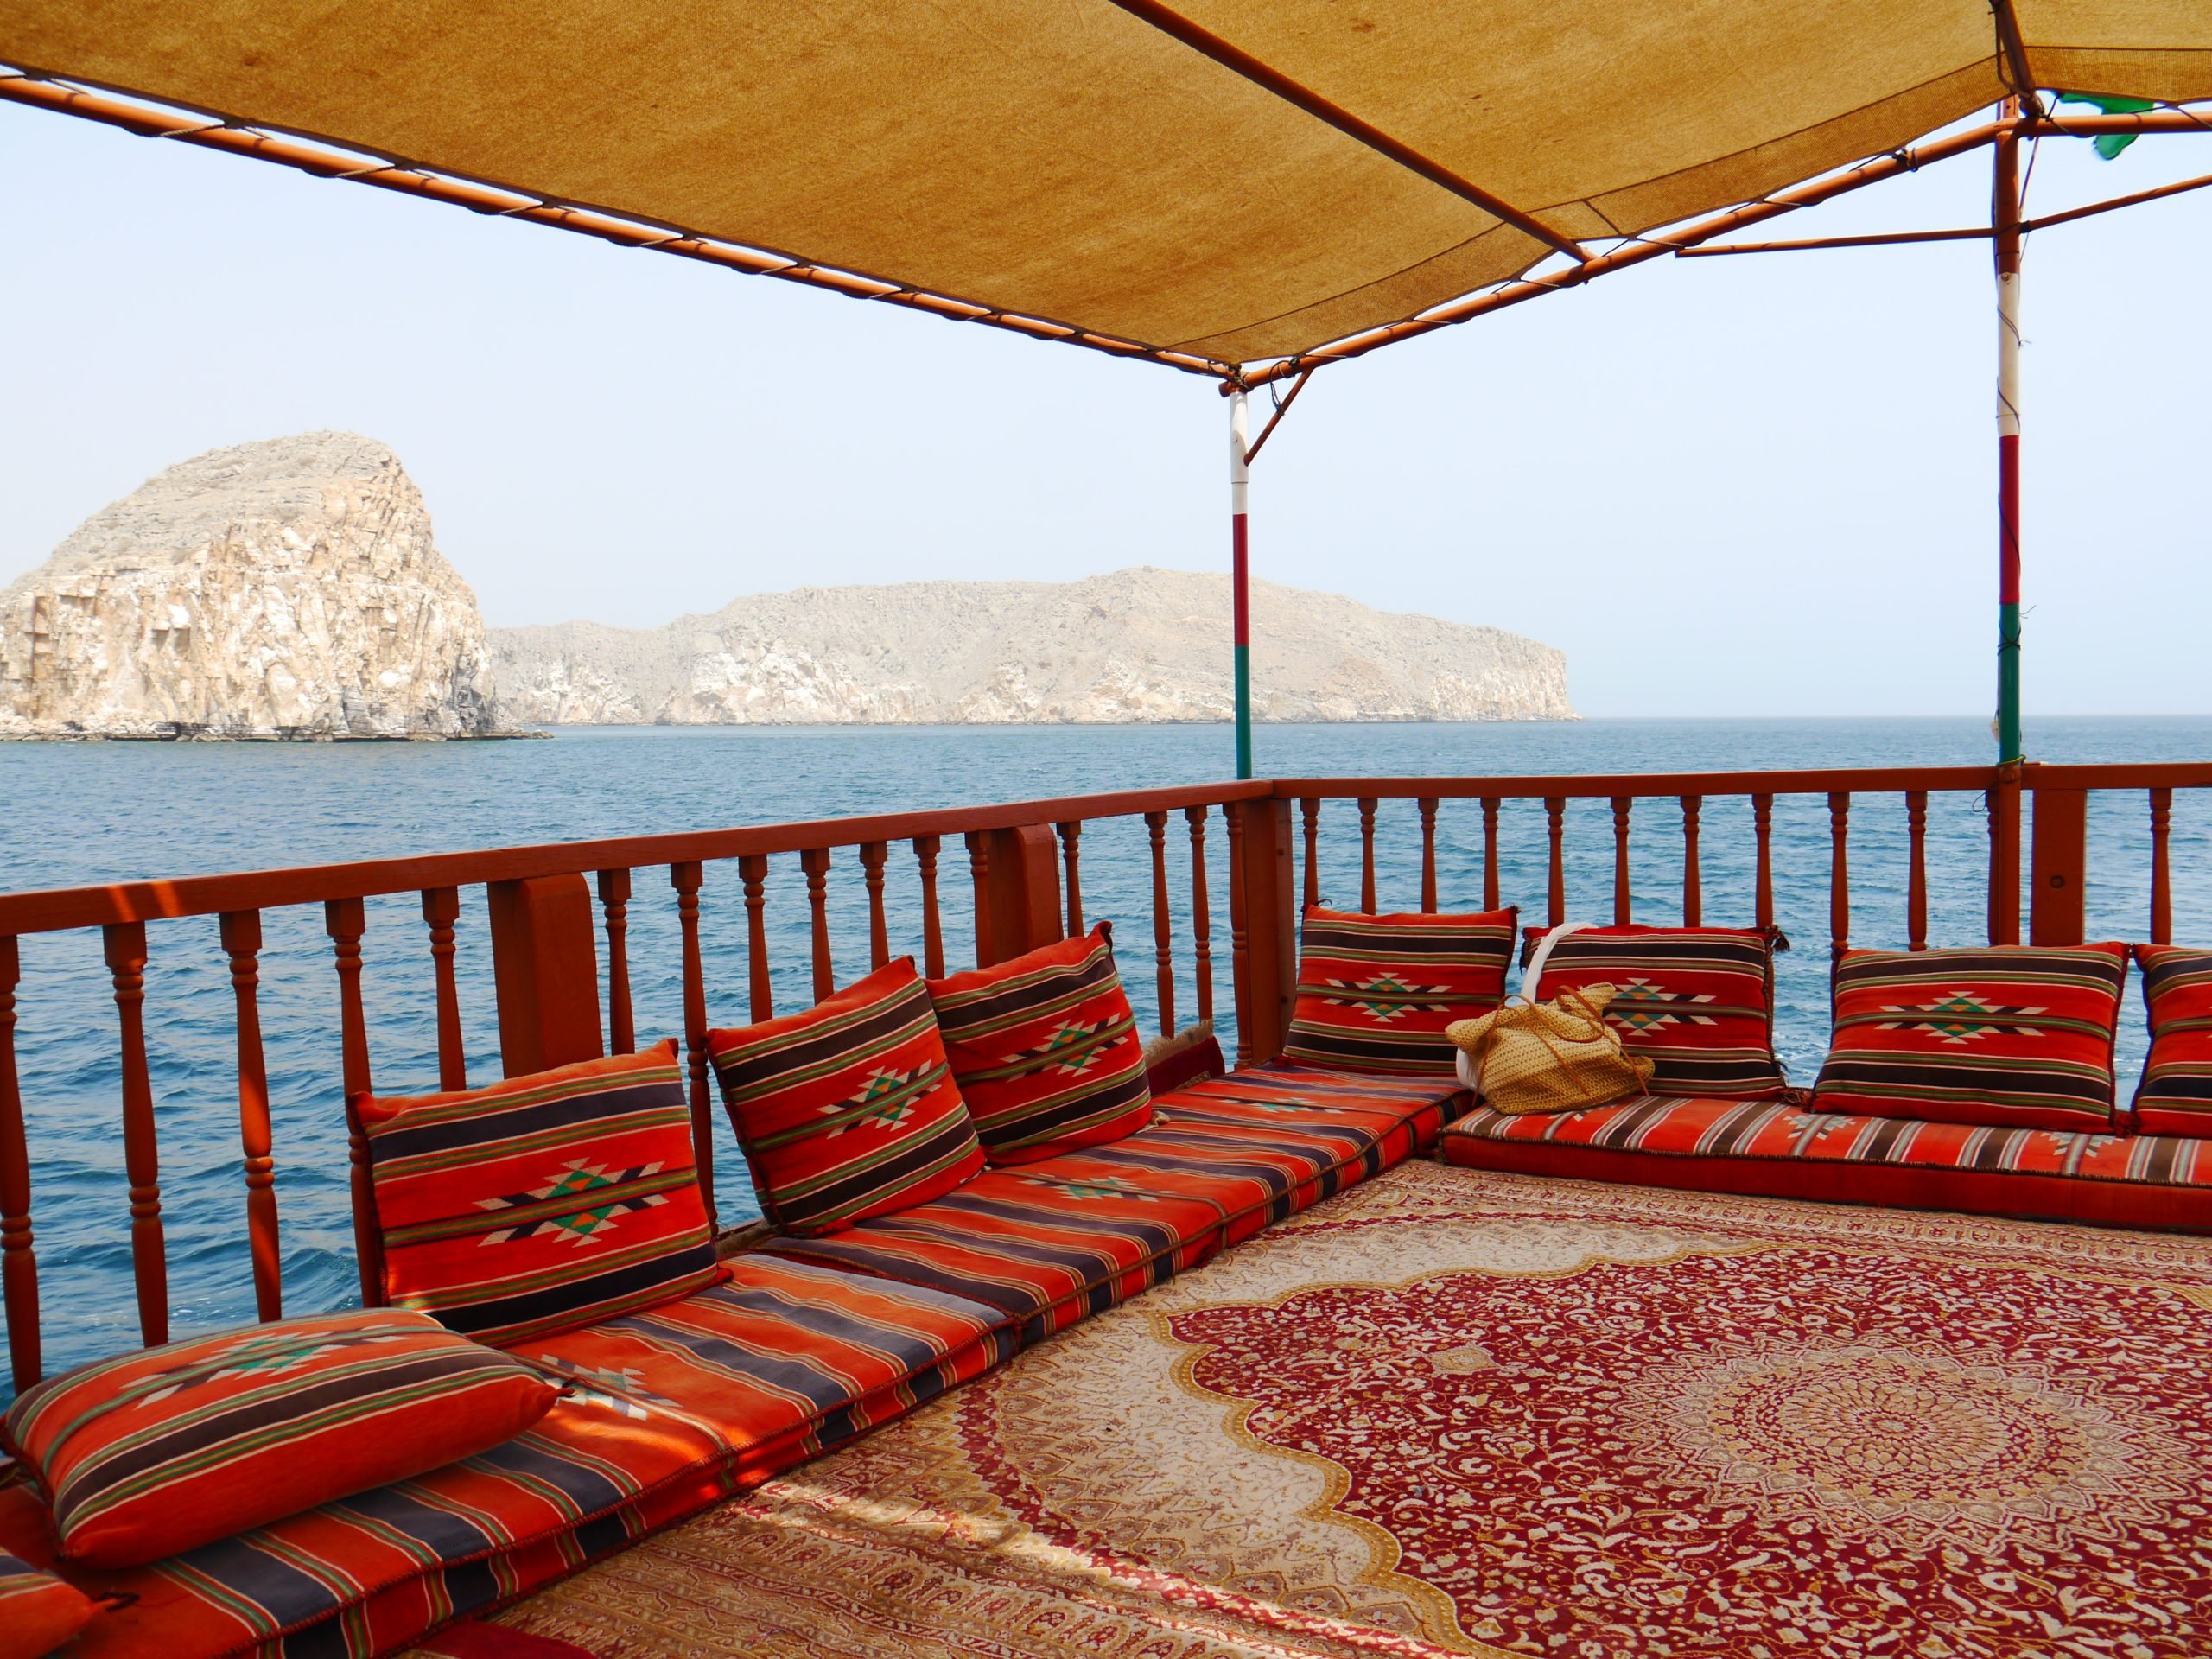 view onside a traditional dhow boat with pillows and carpet cruising the magnificant fjords of Khasab, Musandam, Oman, Middle East